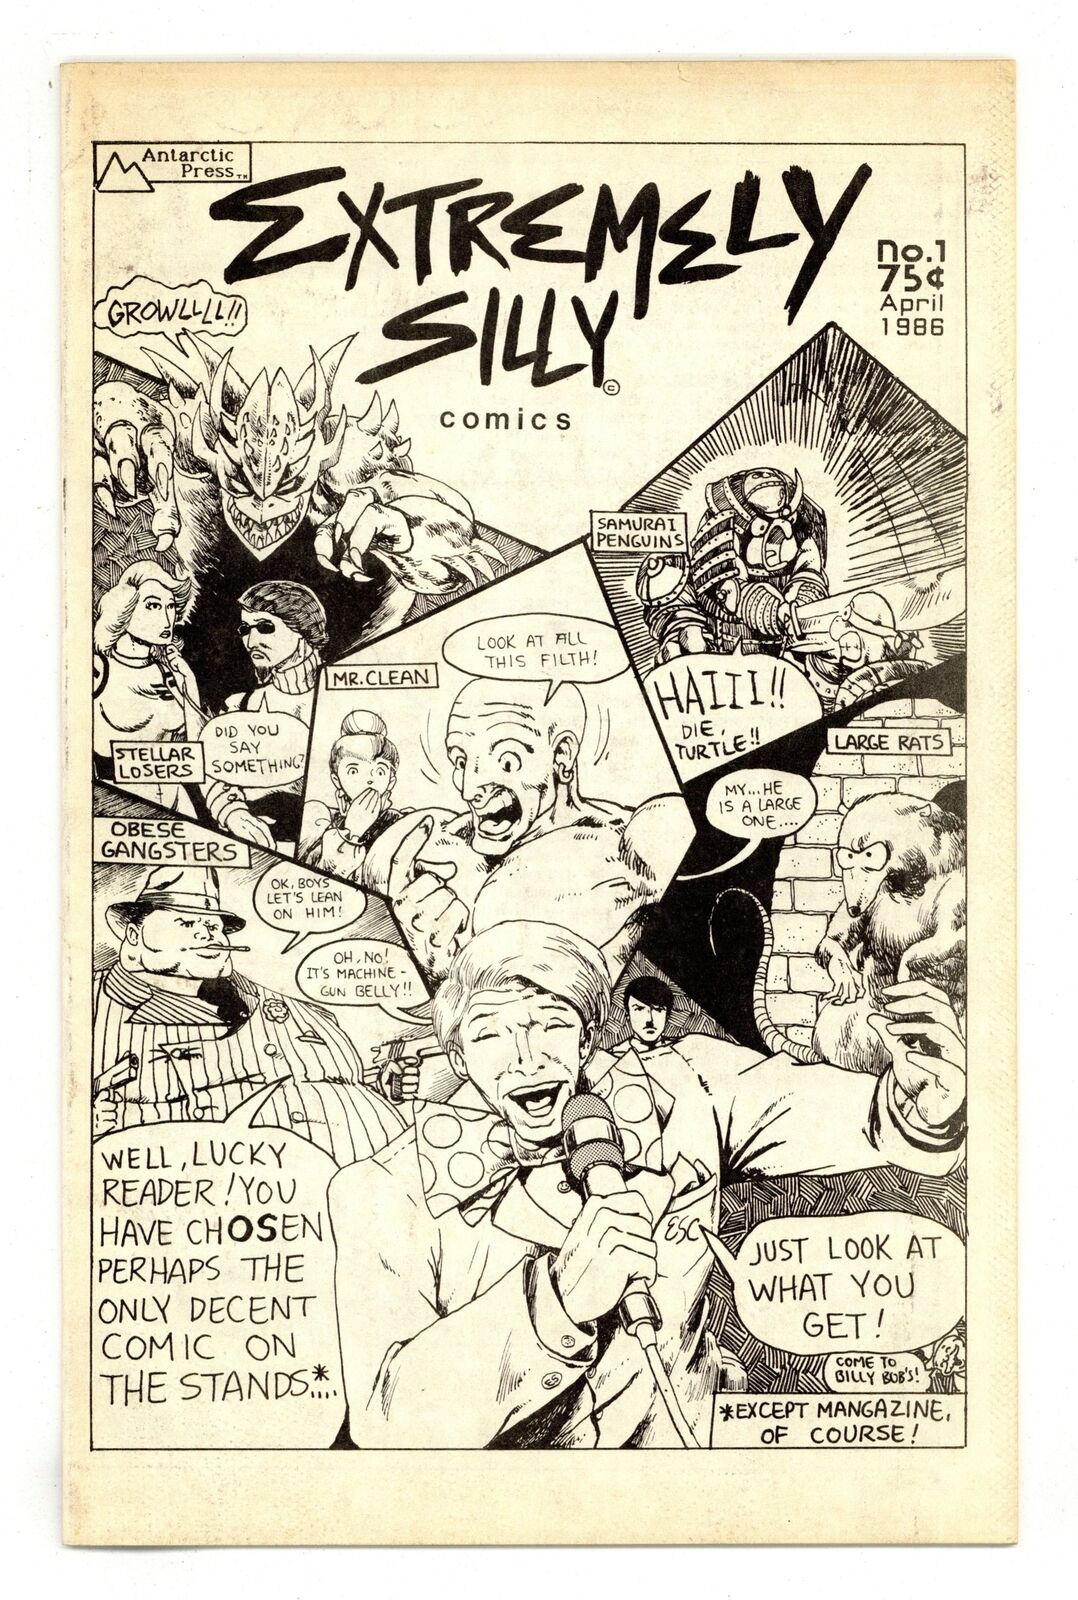 Extremely Silly Comics #1 VG+ 4.5 1986